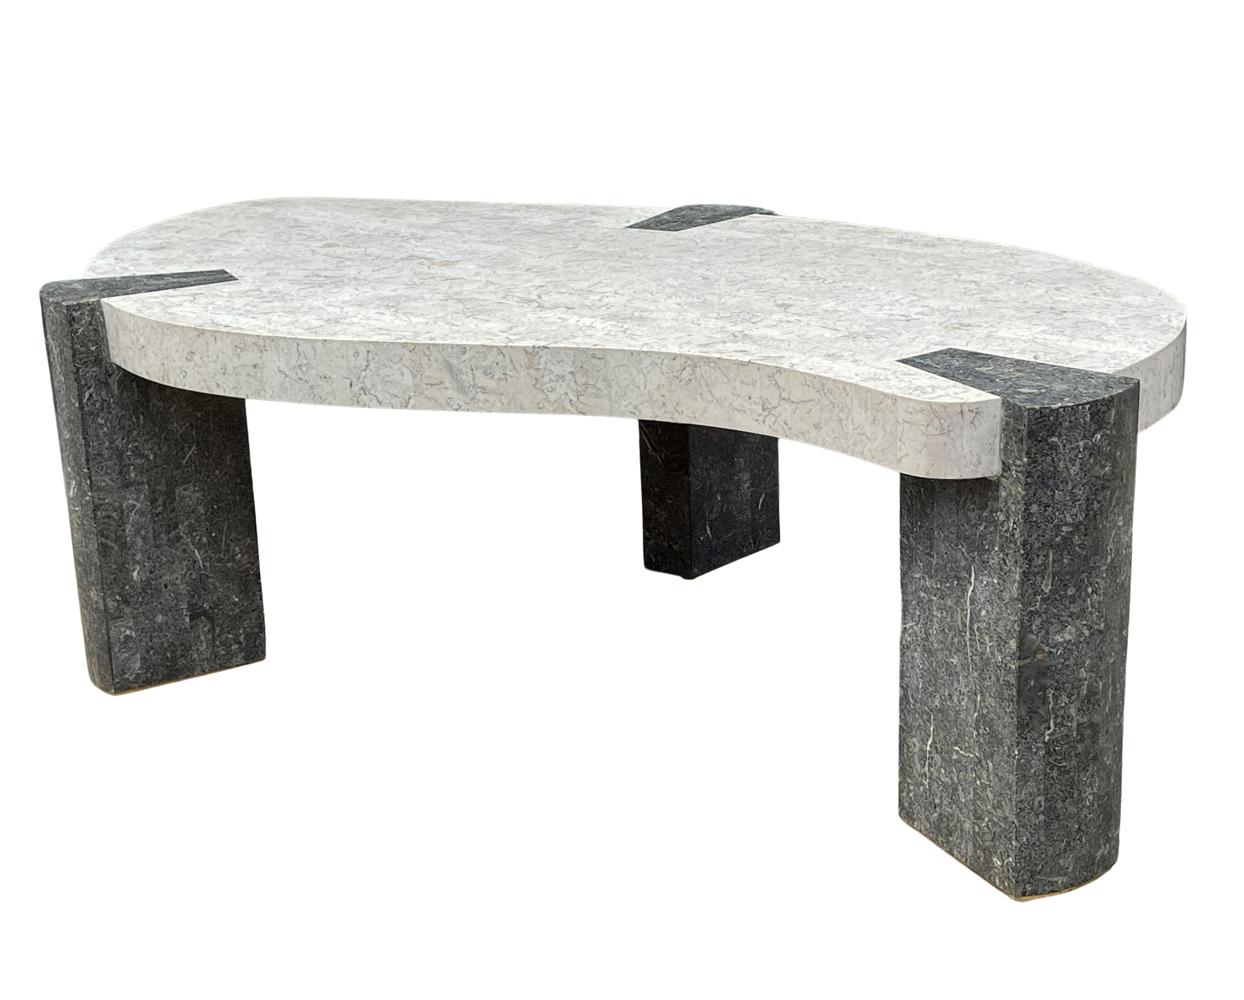 Philippine Mid-Century Modern Tessellated Stone / Marble Cocktail Table by Maitland Smith For Sale